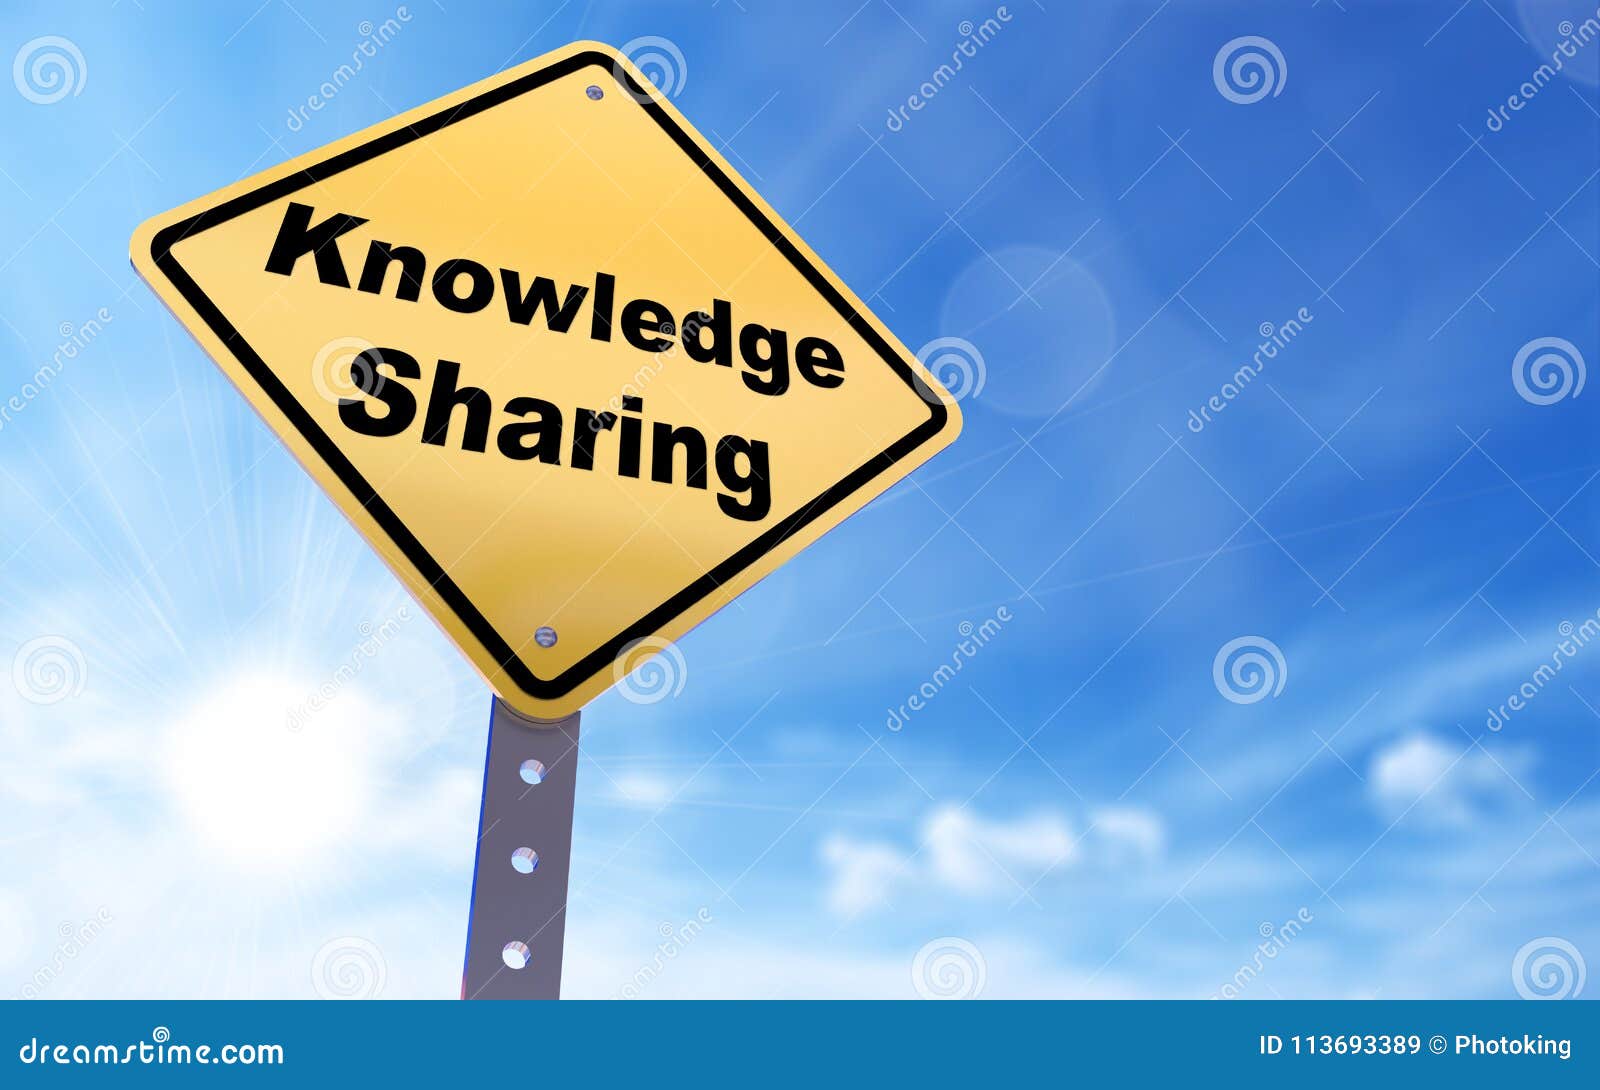 knowledge sharing sign